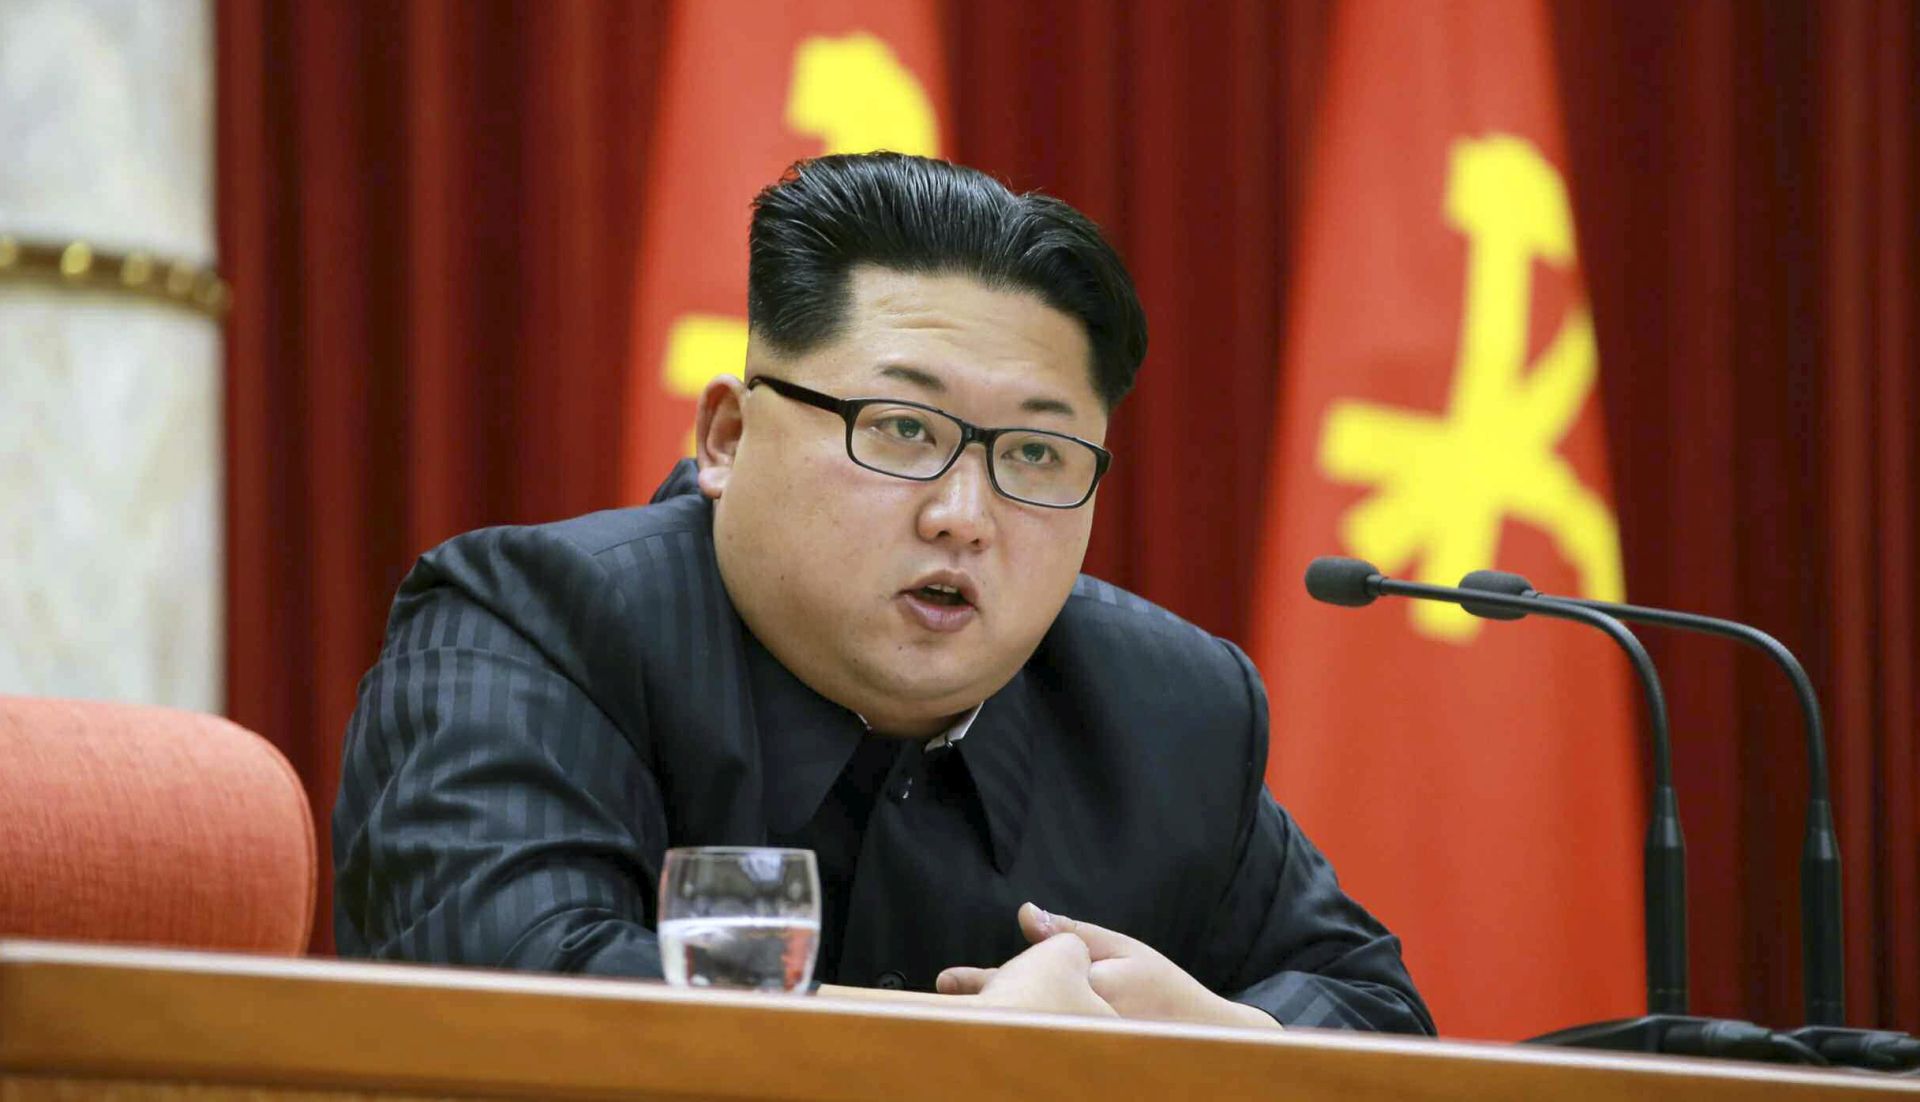 epa05099210 A picture released by North Korea's state-run Rodong Sinmun newspaper on 13 January 2016 shows North Korean leader Kim Jong-un speaking during a ceremony at the meeting hall of the Central Committee of the Workers' Party of Korea in Pyongyang, North Korea, 12 January 2016, to award nuclear scientists, technicians, soldier-builders, workers and officials for their contributions to what the North claims was the successful test of a hydrogen bomb on 06 January 2016.  EPA/RODONG SINMUN SOUTH KOREA OUT